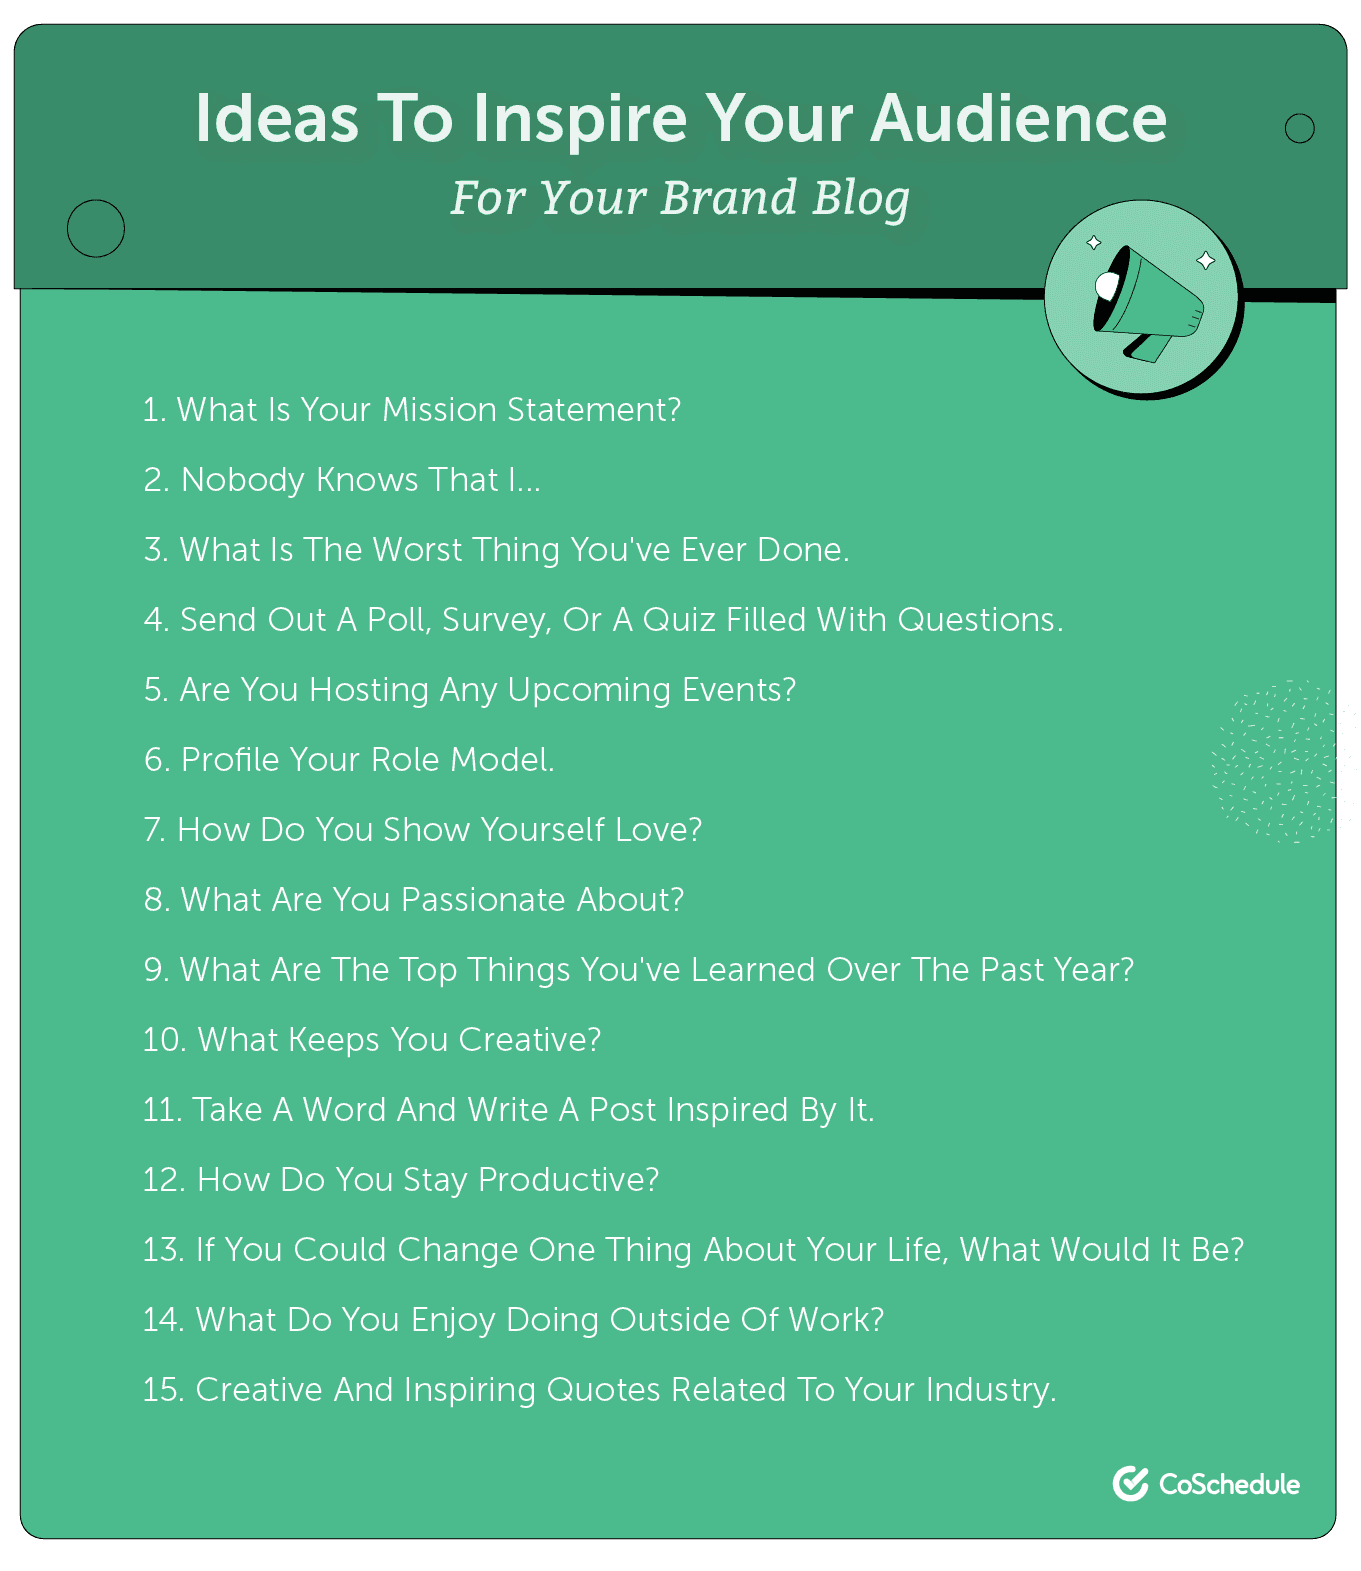 Ideas for inspiring your audience.